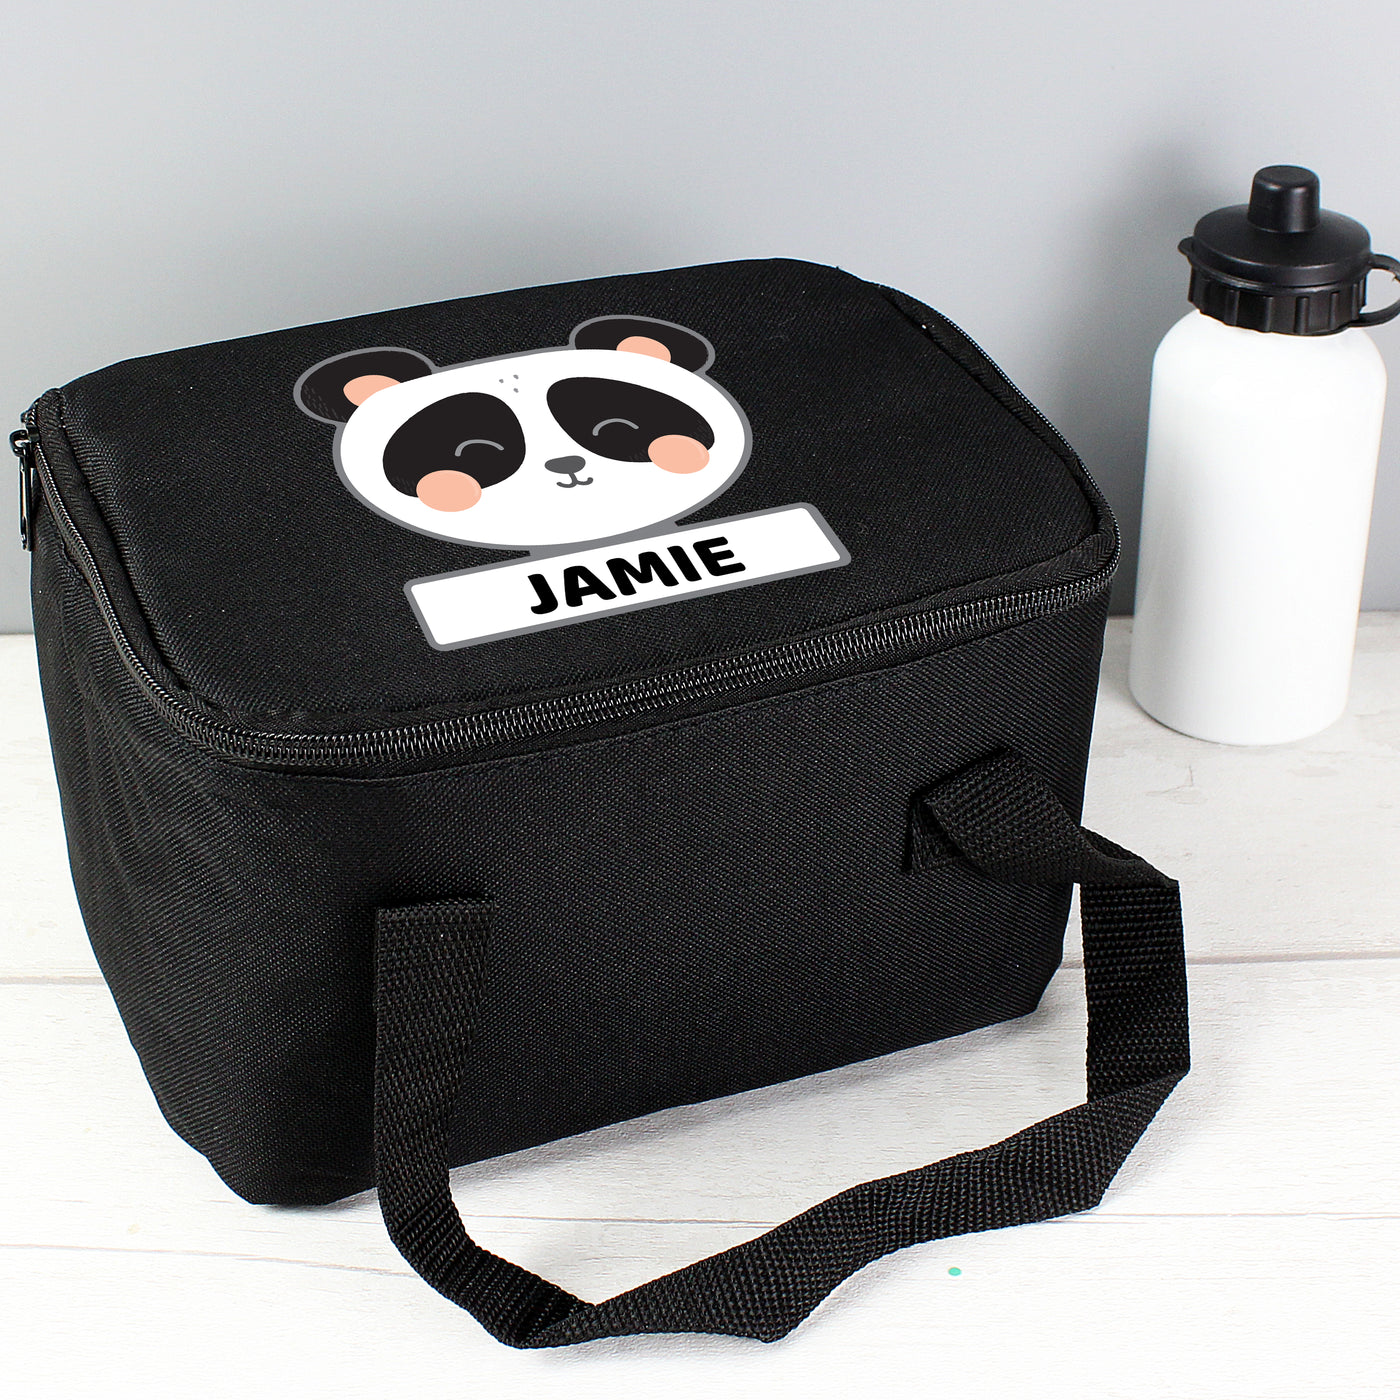 Personalised Adventure Is Out There Storage Bag